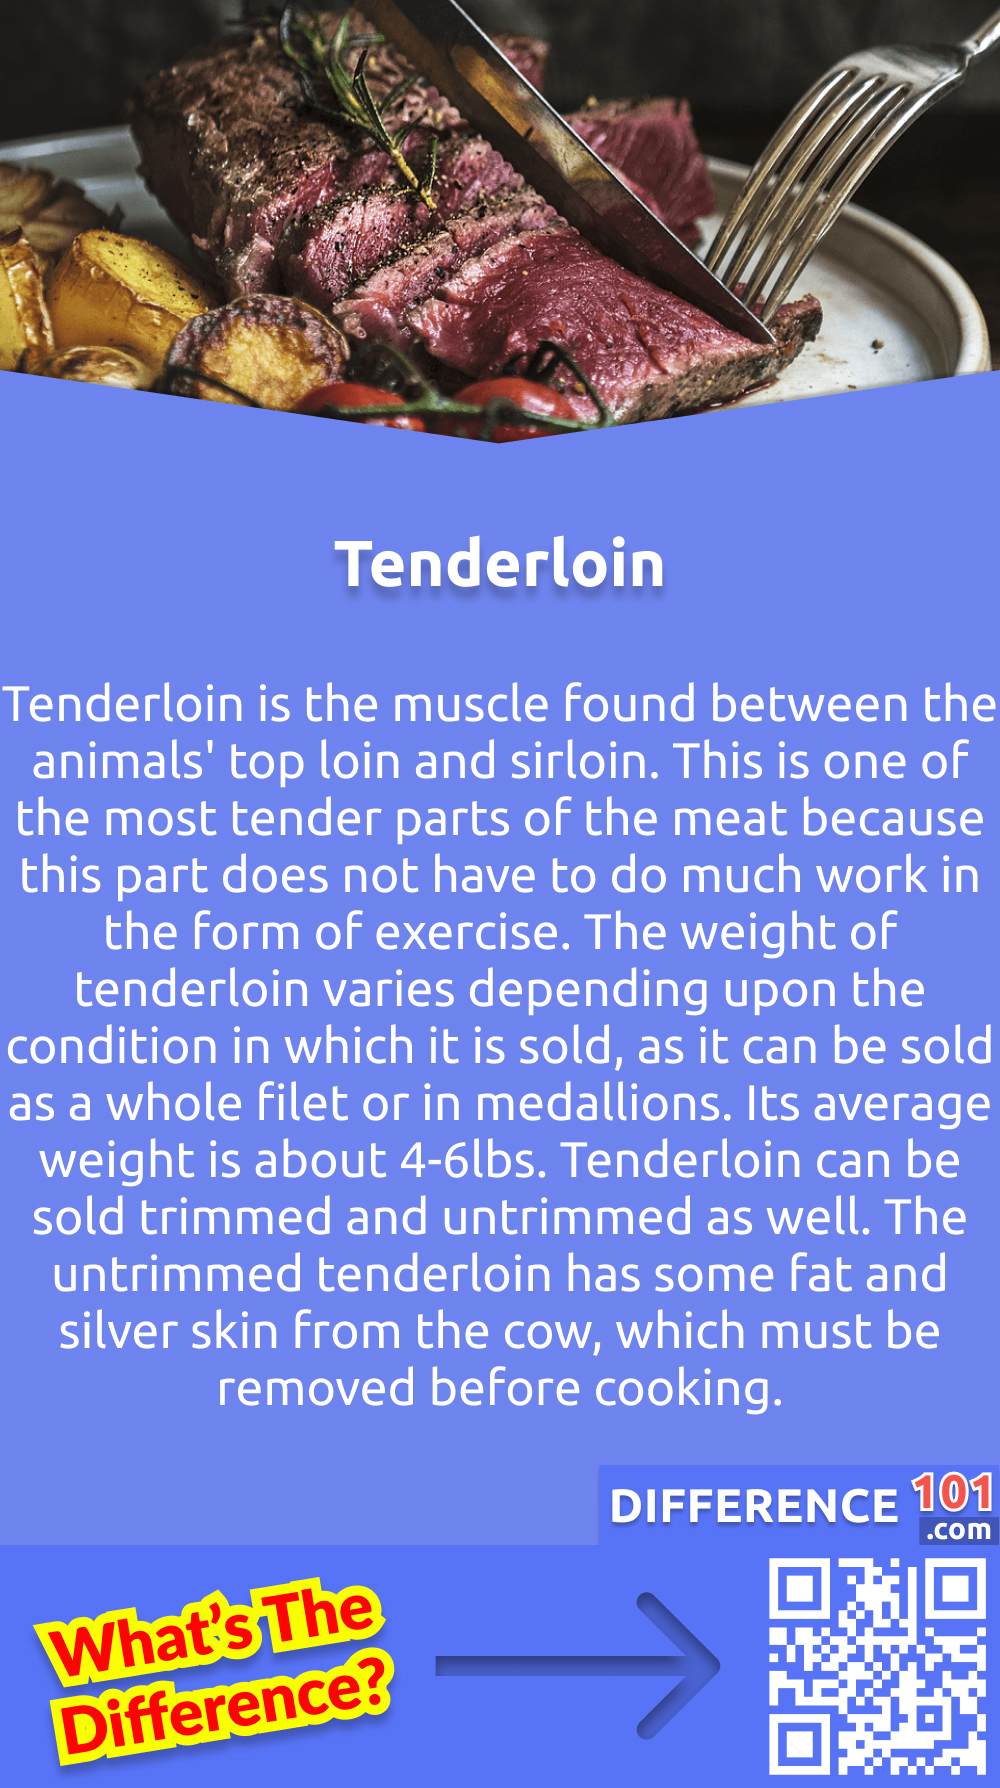 What Is Tenderloin? Tenderloin is the muscle found between the animals' top loin and sirloin. This is one of the most tender parts of the meat because this part does not have to do much work in the form of exercise. The weight of tenderloin varies depending upon the condition in which it is sold, as it can be sold as a whole filet or in medallions. Its average weight is about 4-6lbs. Tenderloin can be sold trimmed and untrimmed as well. The untrimmed tenderloin has some fat and silver skin from the cow, which must be removed before cooking. The large medallion in the middle of the tenderloin is also known as tornadoes and can be cooked individually. The top end of the tenderloin is known as "chateaubriand," which can be enough for two people to eat.